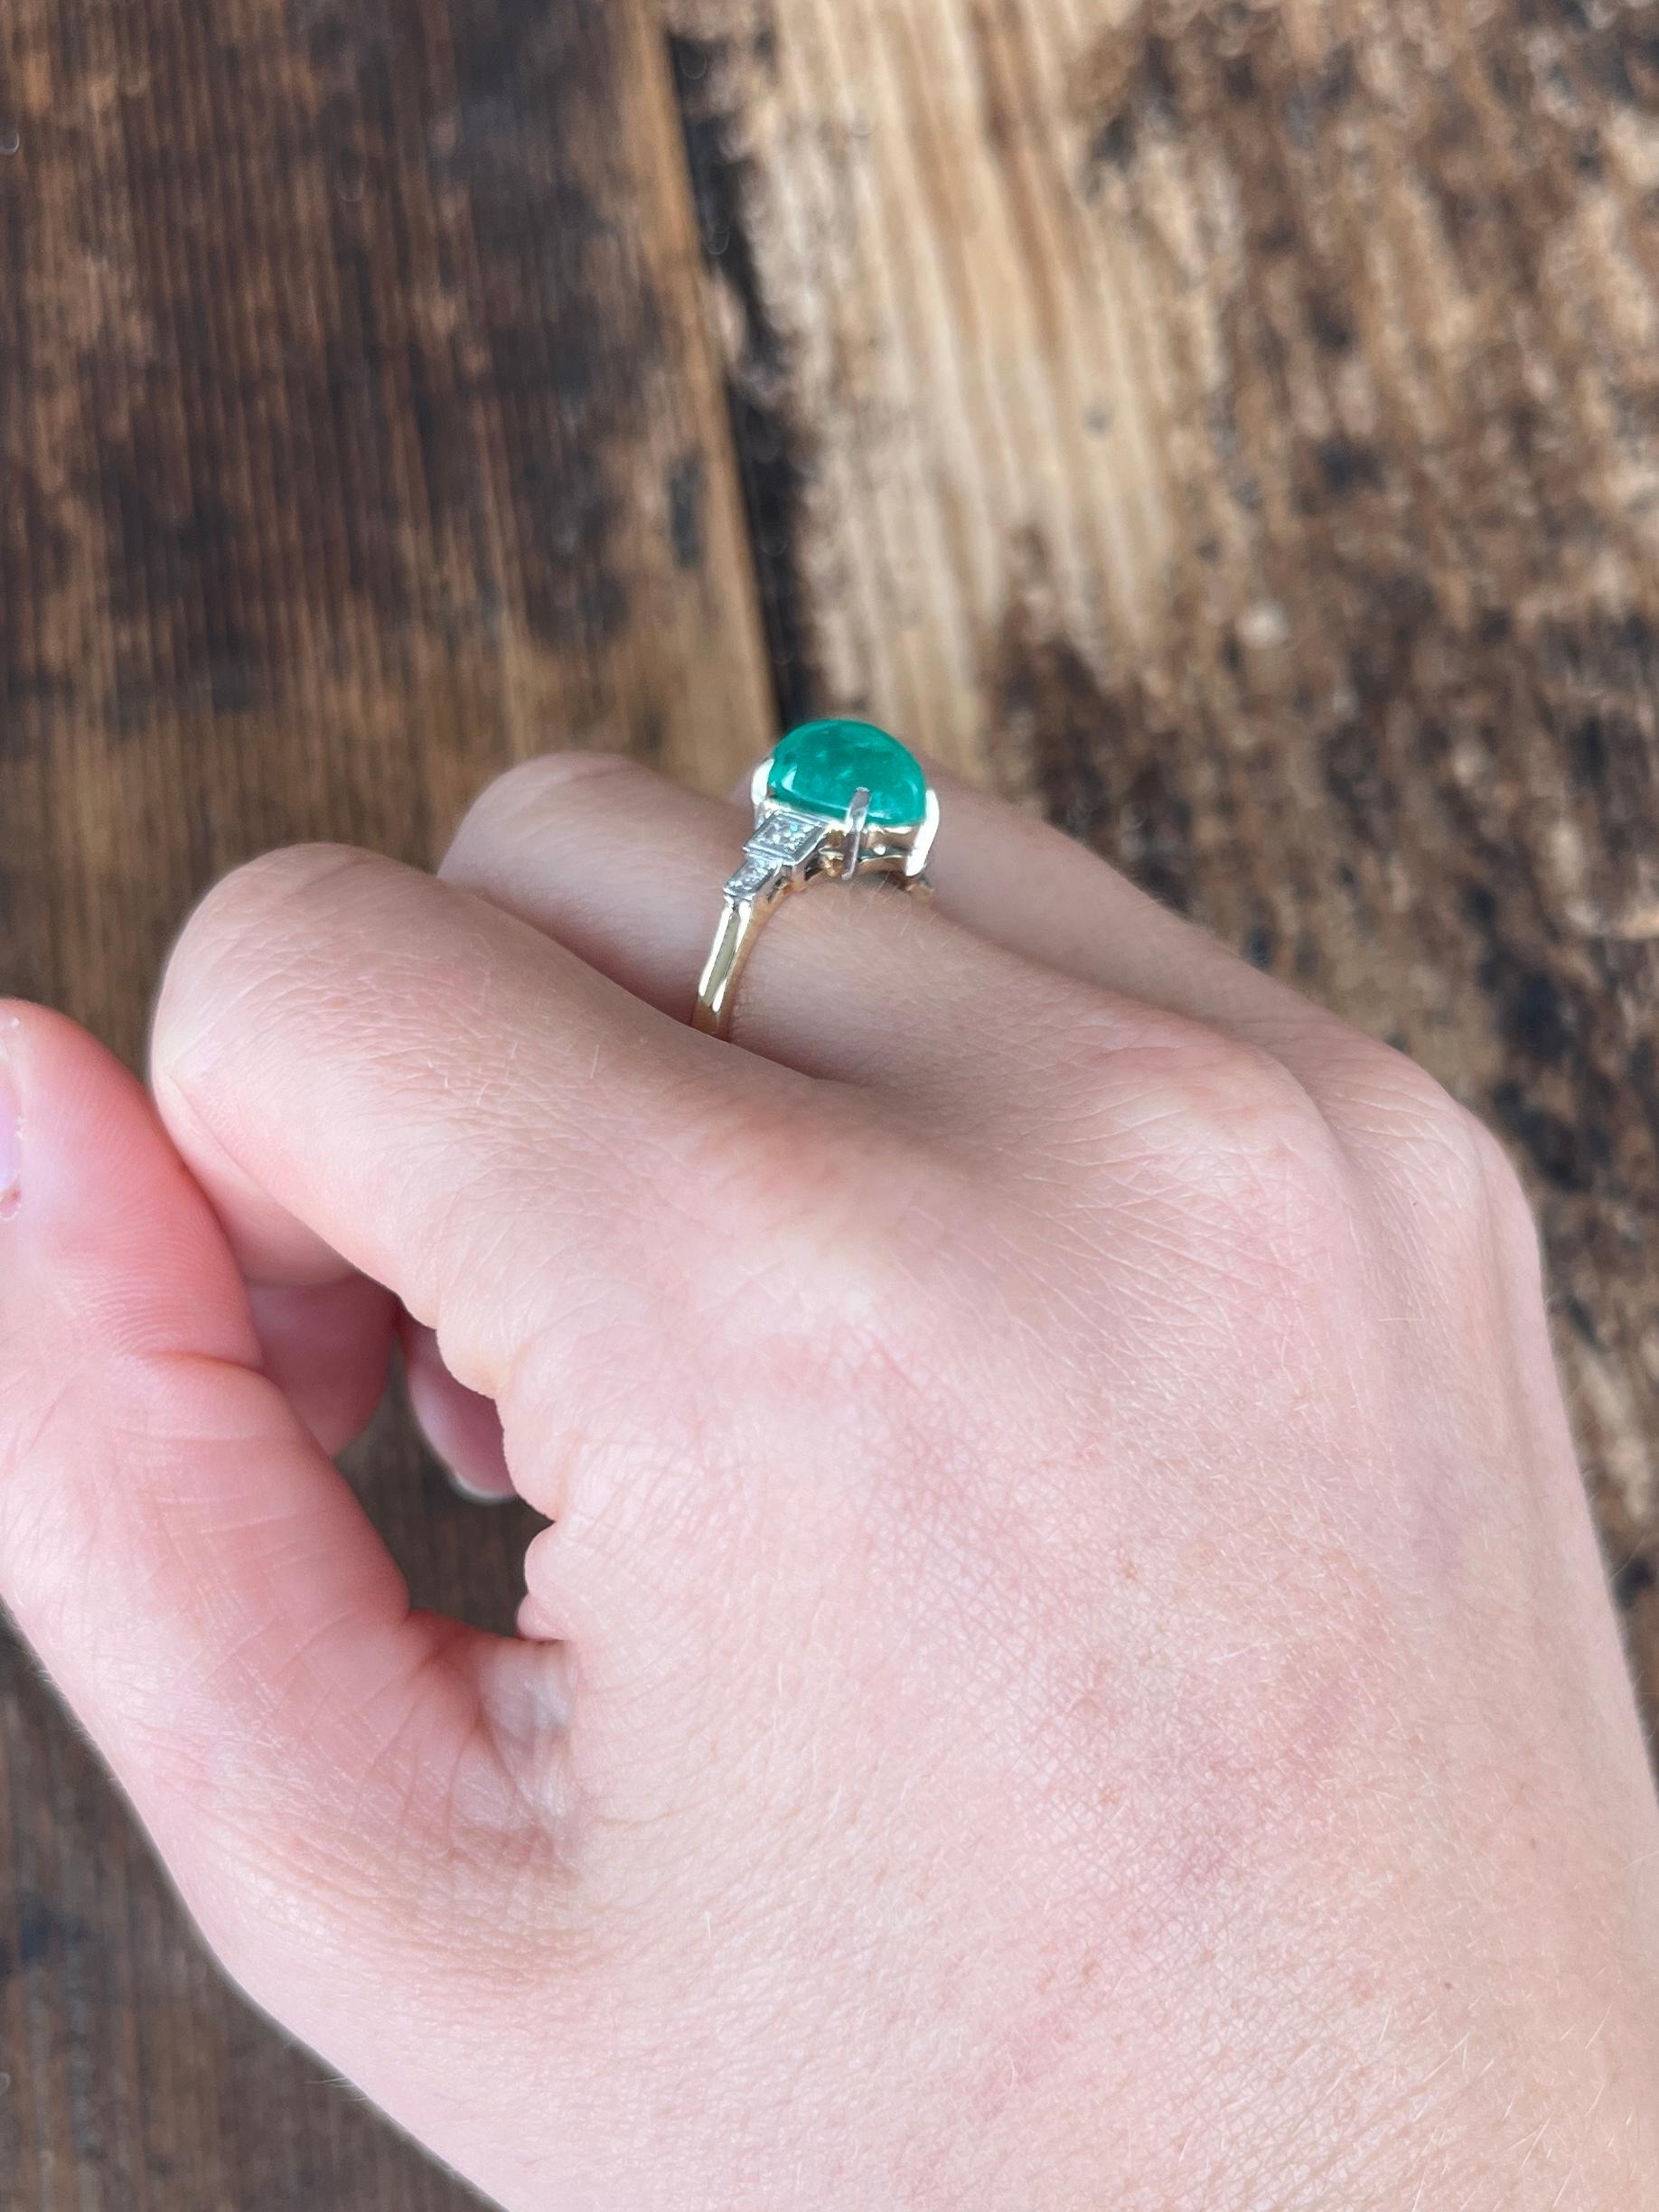 This stunning stone is a cabochon emerald and is so striking! Either side of the glossy bright green stone are two sparkling diamonds set within the platinum step shoulders. The diamond shoulders total 5pts each. 

Ring Size: O or 7 1/4
Height Off